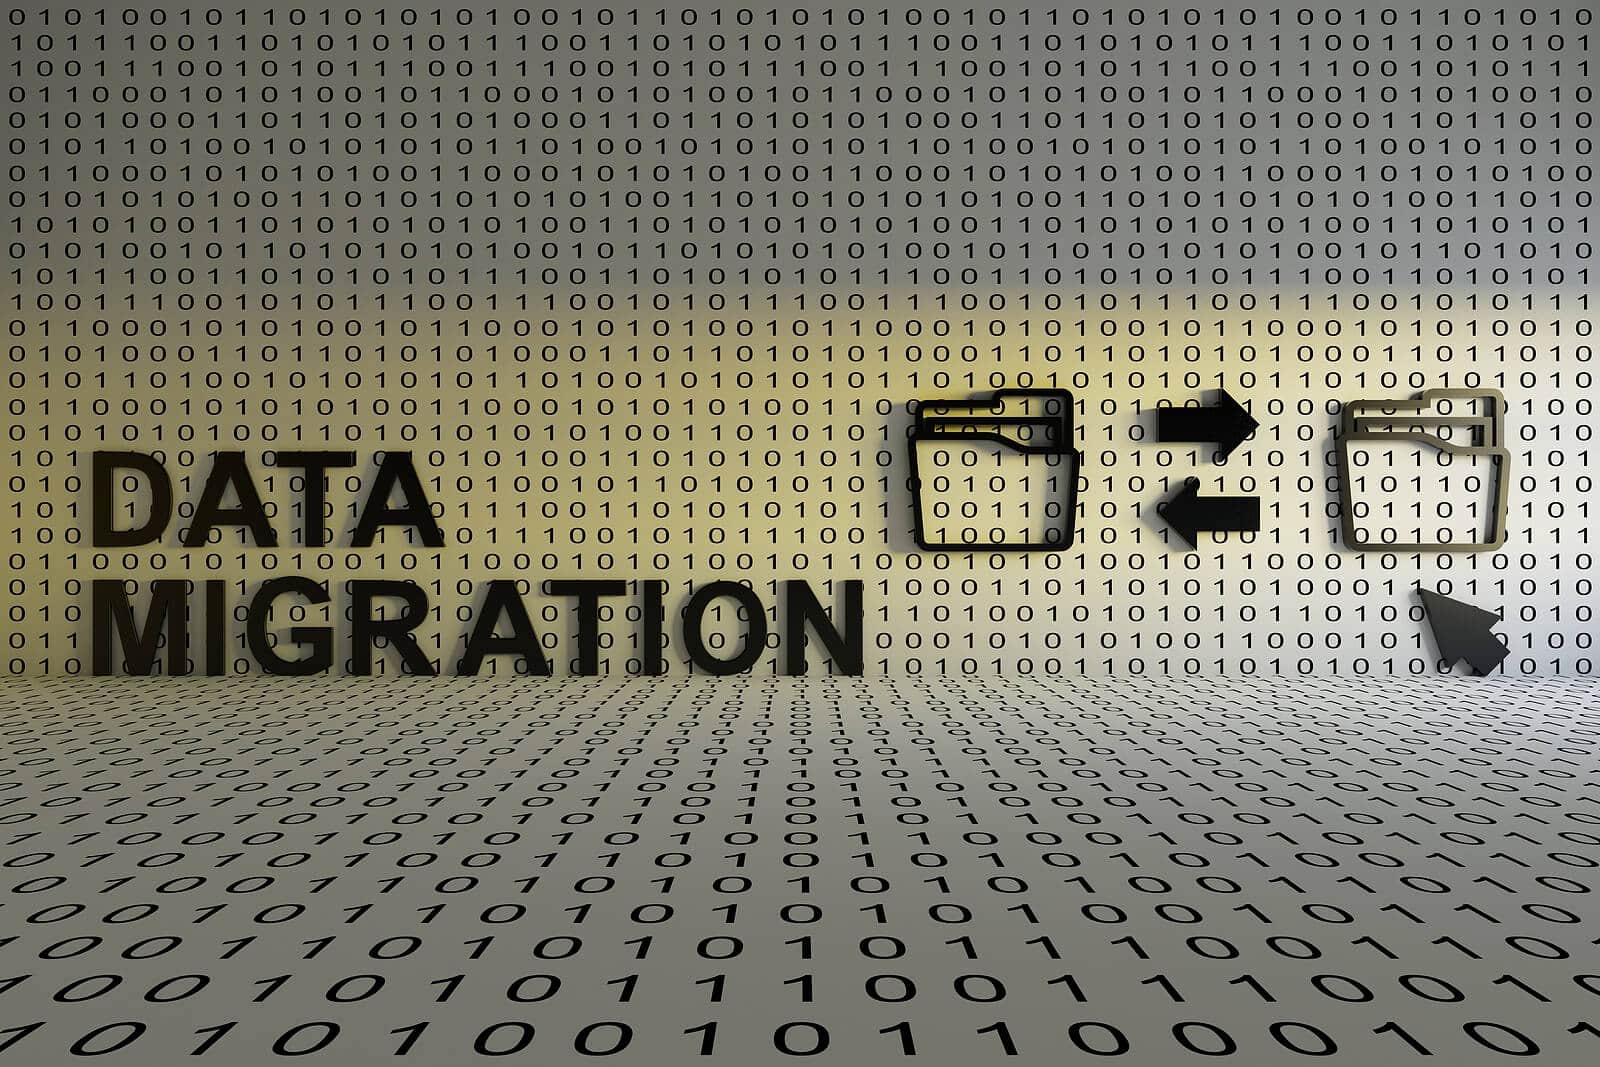 Challenges of Migrating Data From Google Drive to SharePoint